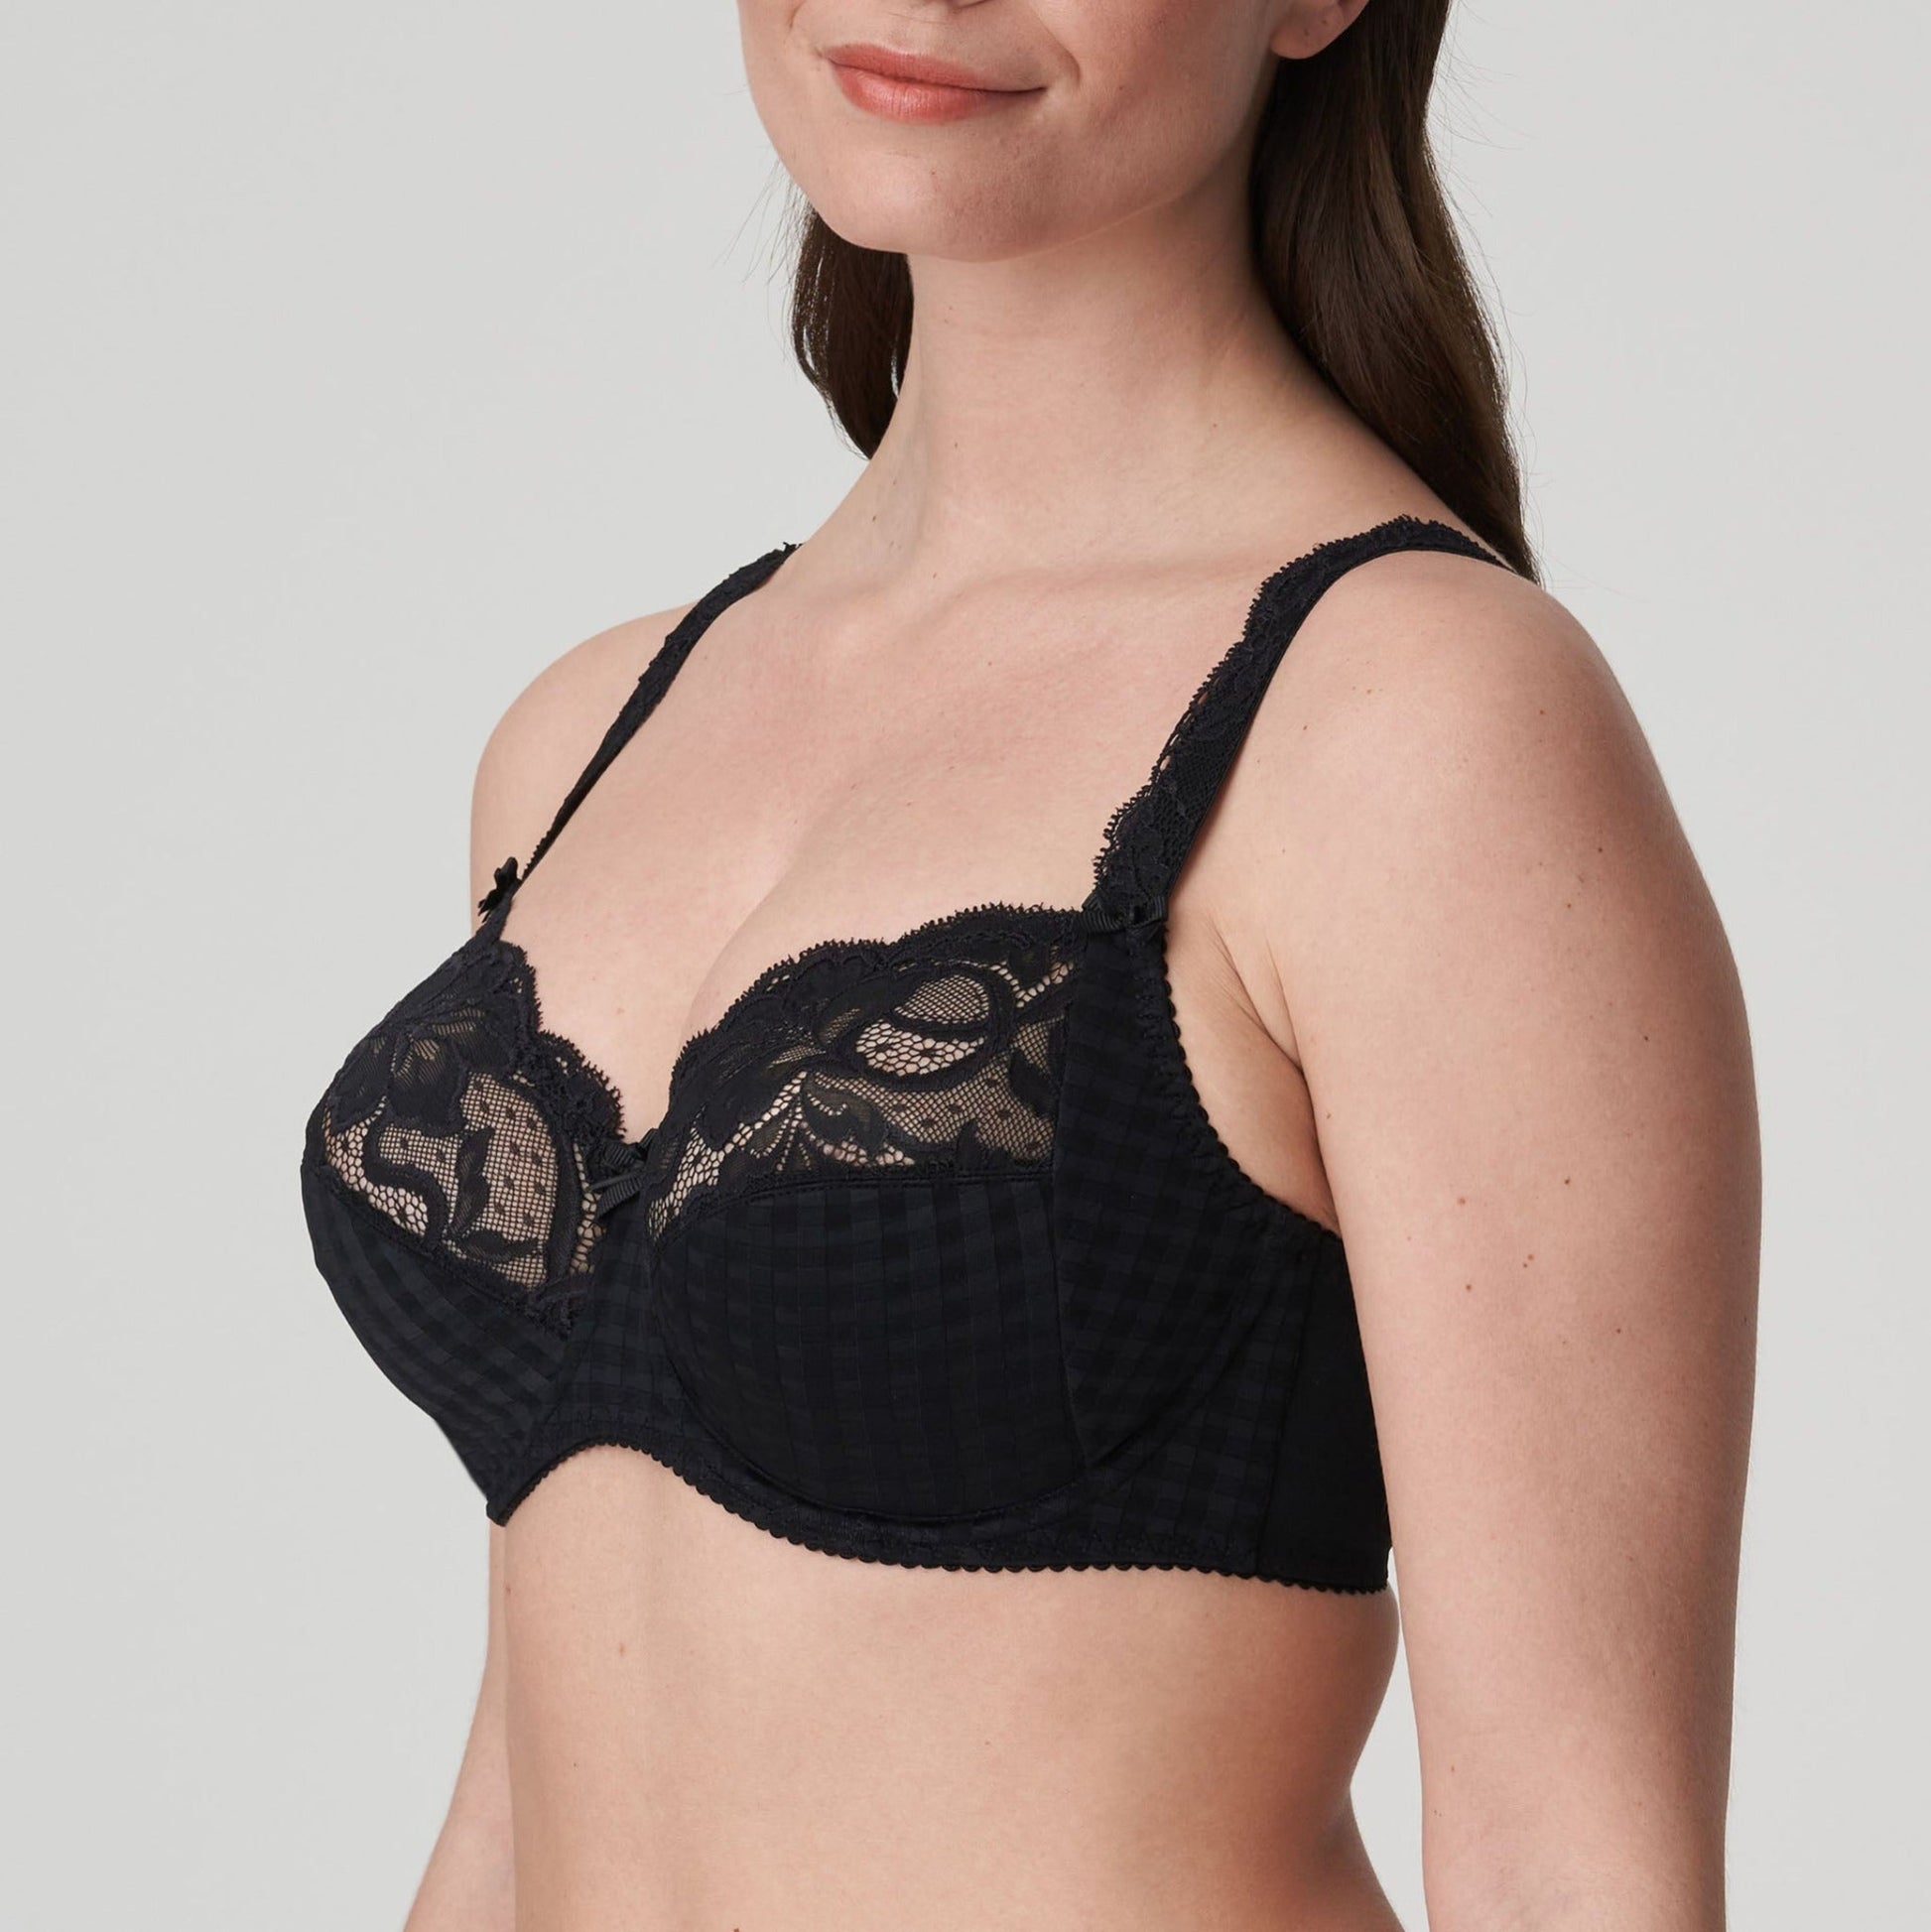 Side view of a woman wearing the DD+ Madison full cup bra in black by PrimaDonna.